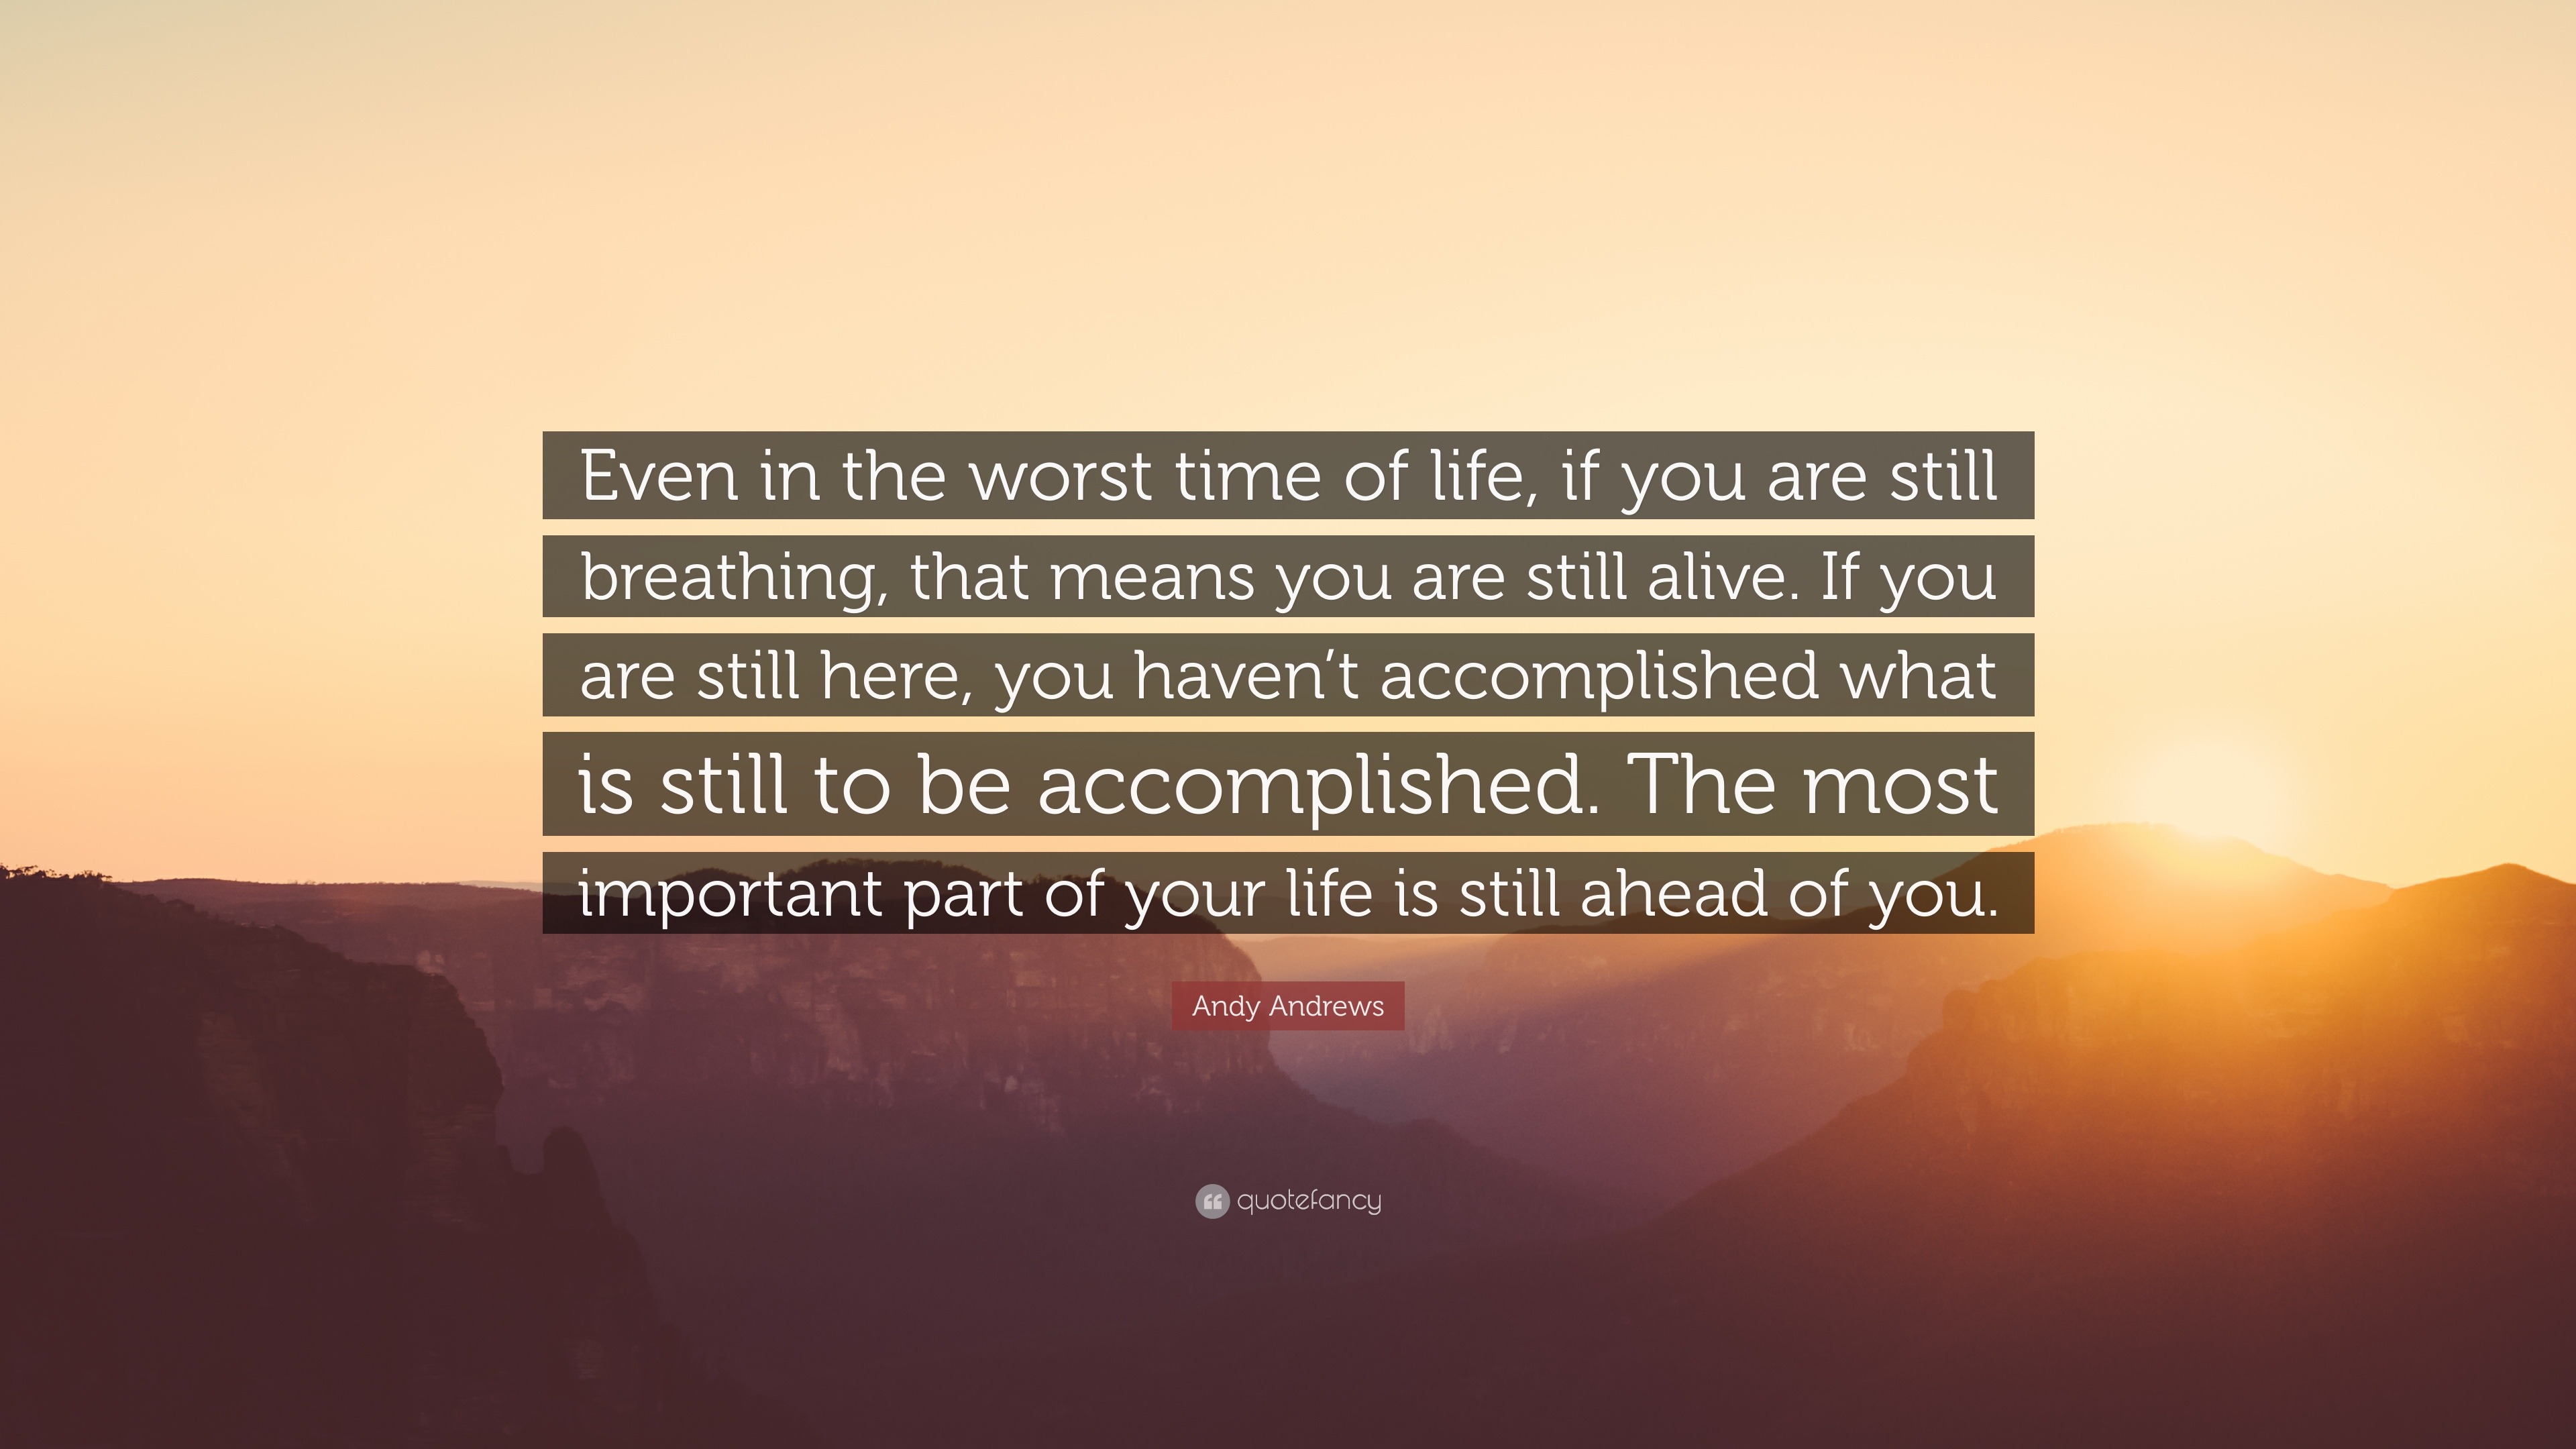 Andy Andrews Quote “Even in the worst time of life if you are